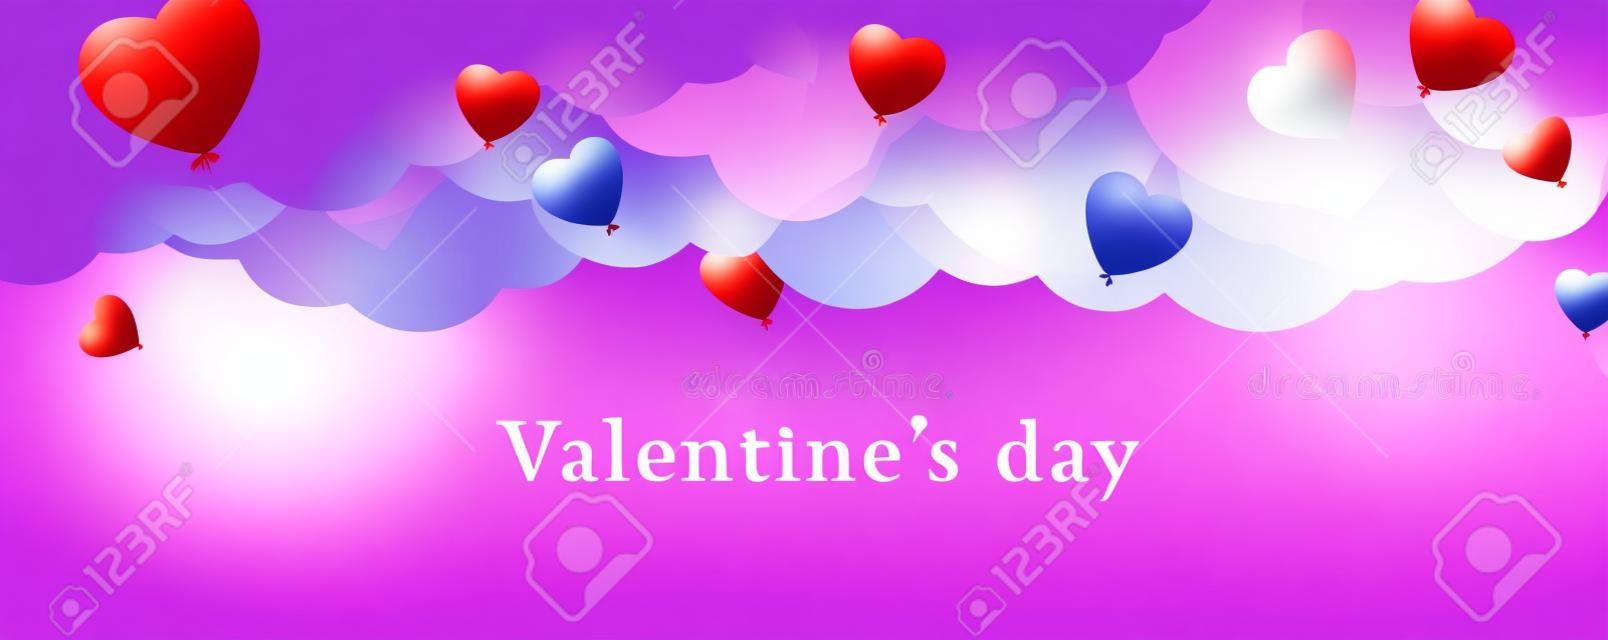 Valentines day background with Heart Shaped Balloons. Vector illustration.banners.Wallpaper.flyers, invitation, posters, brochure, voucher discount.